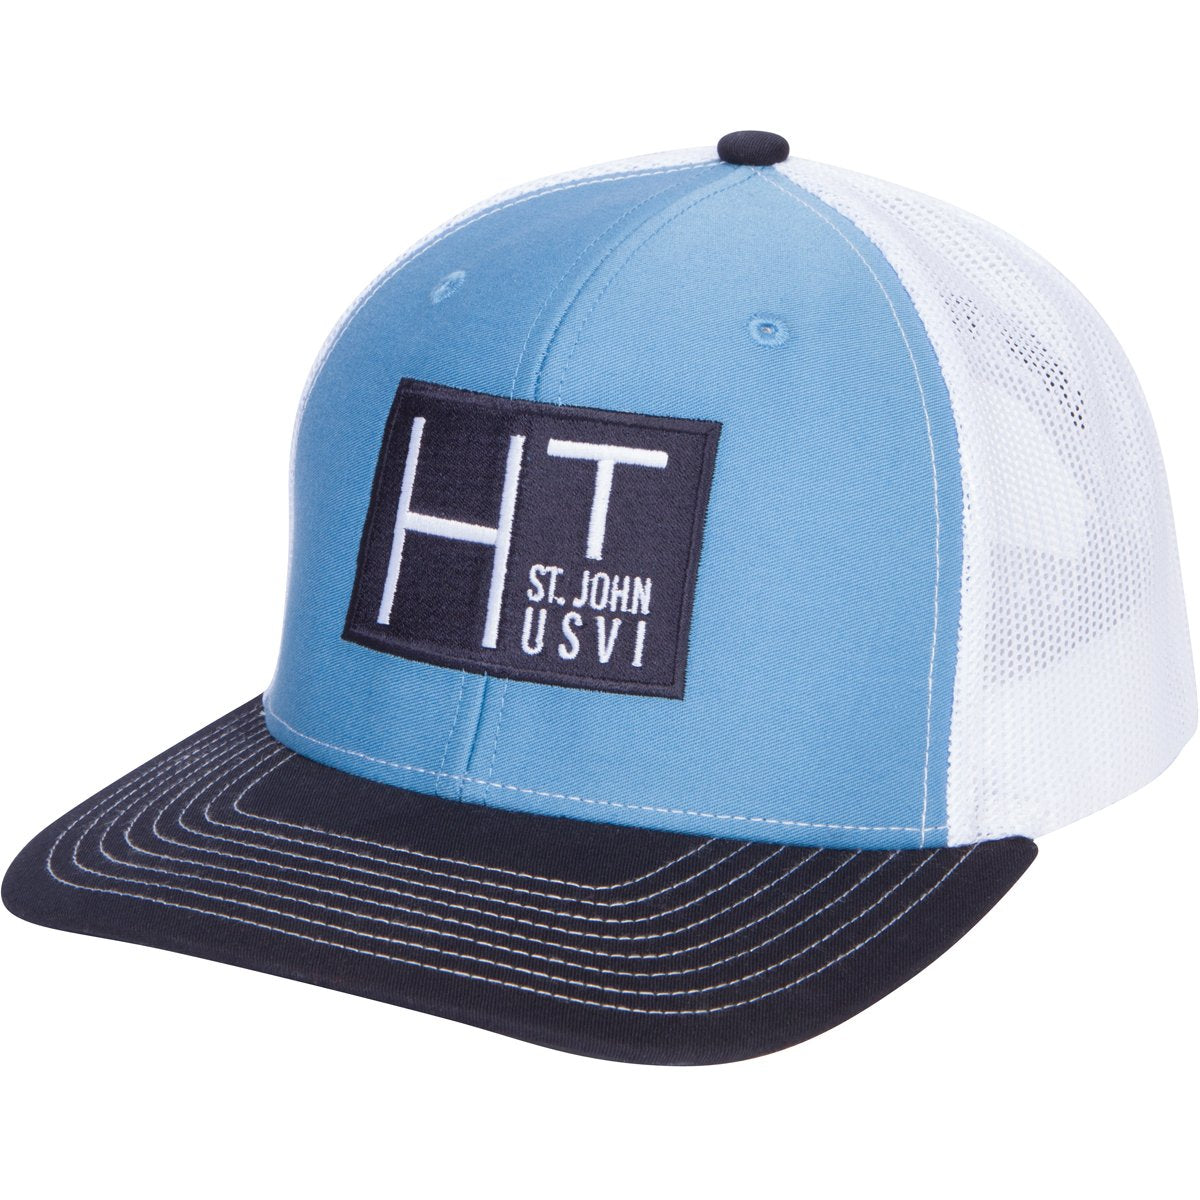 HAT COLLECTION | LIVIN' THE DREAM | TRUCKER HATS